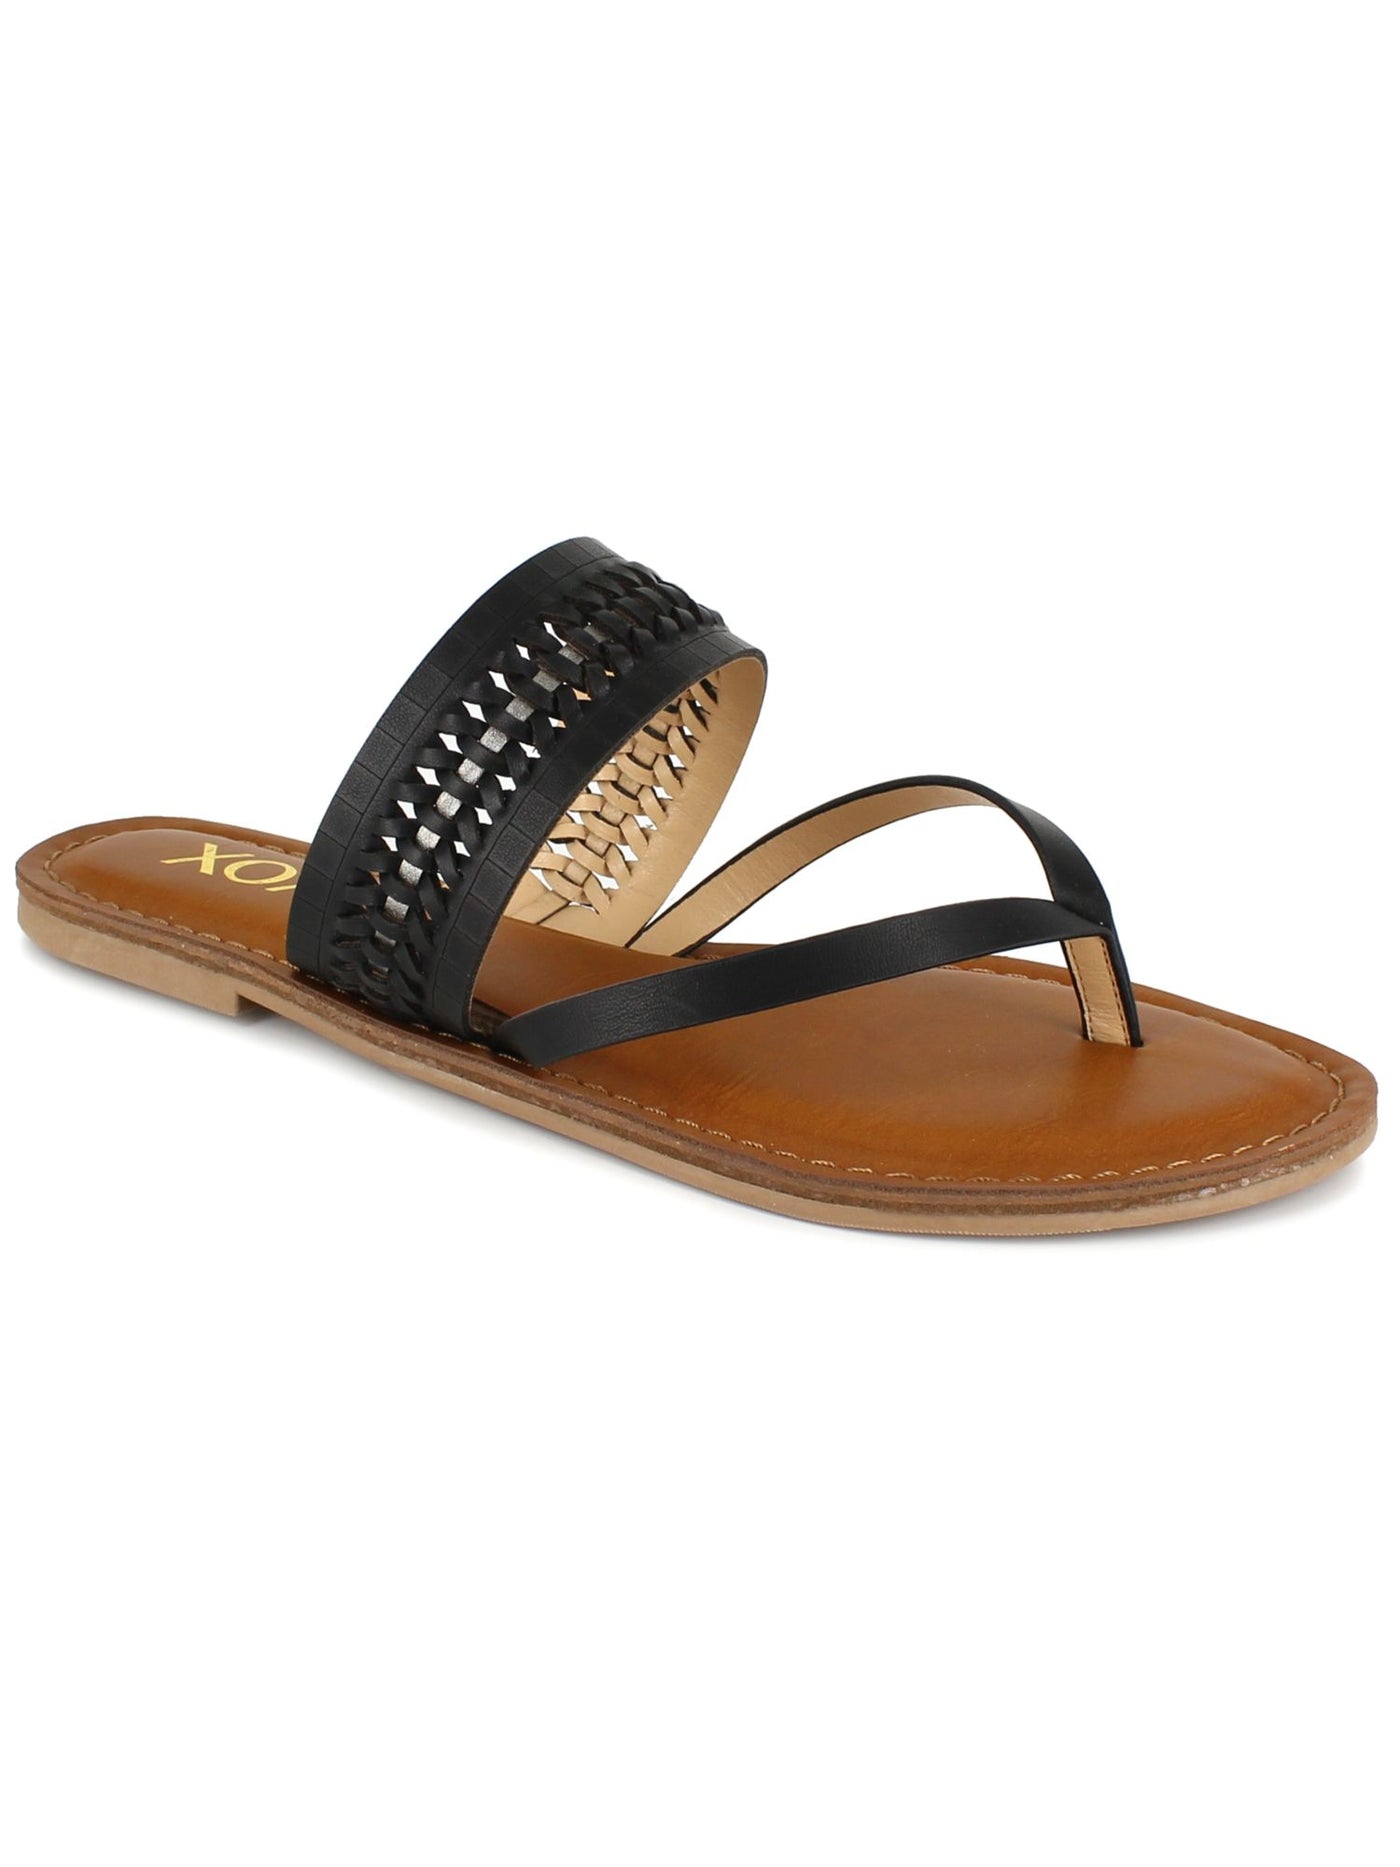 XOXO Womens Black Microfiber Weave Robby Round Toe Slip On Thong Sandals Shoes 6.5 M